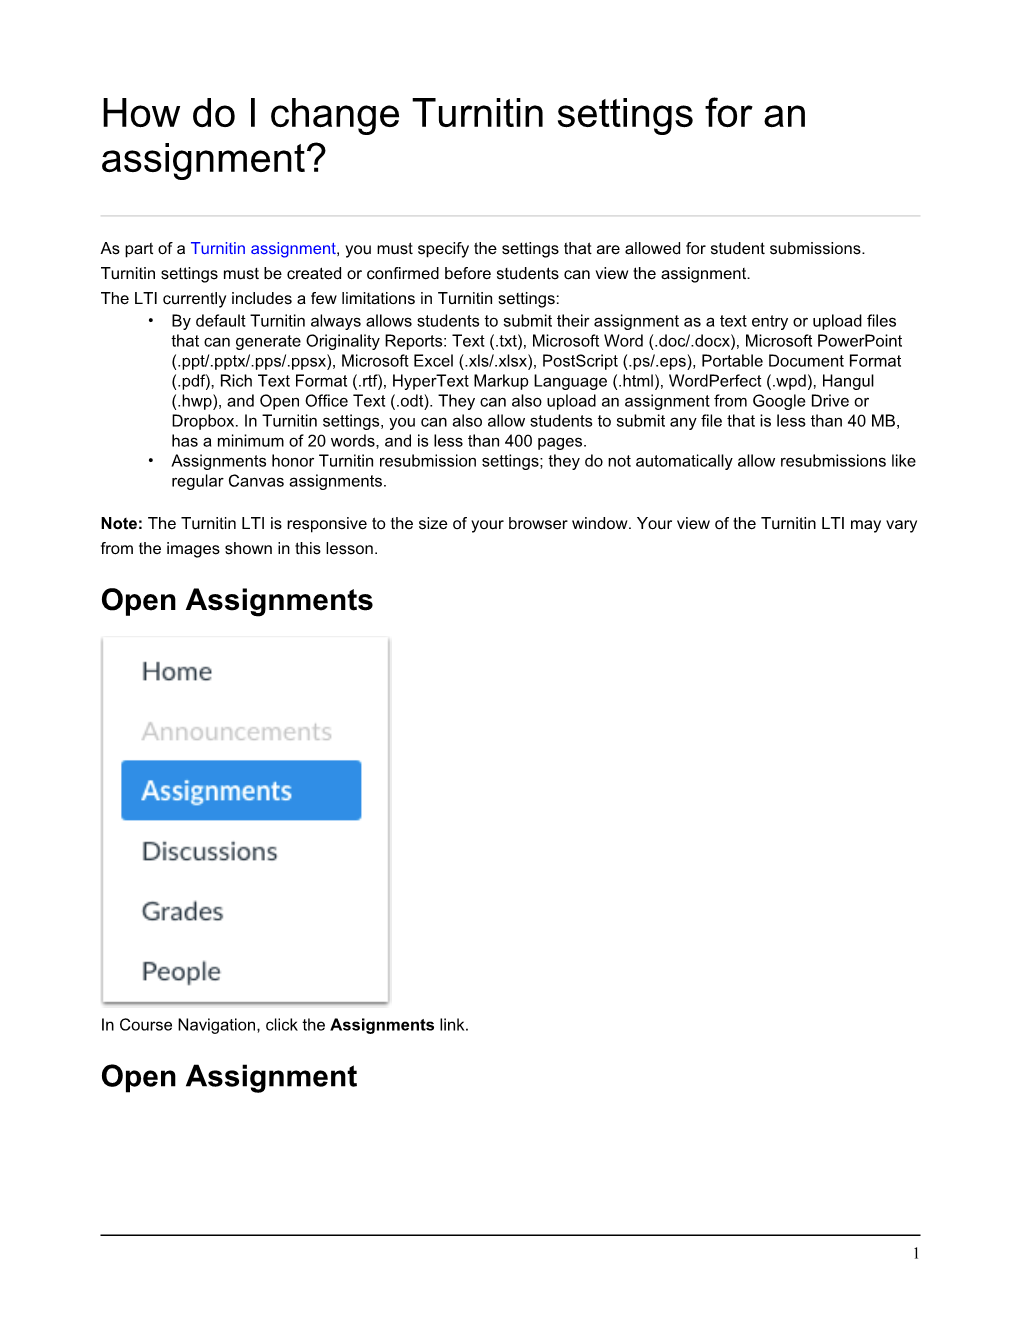 How Do I Change Turnitin Settings for an Assignment.Pdf